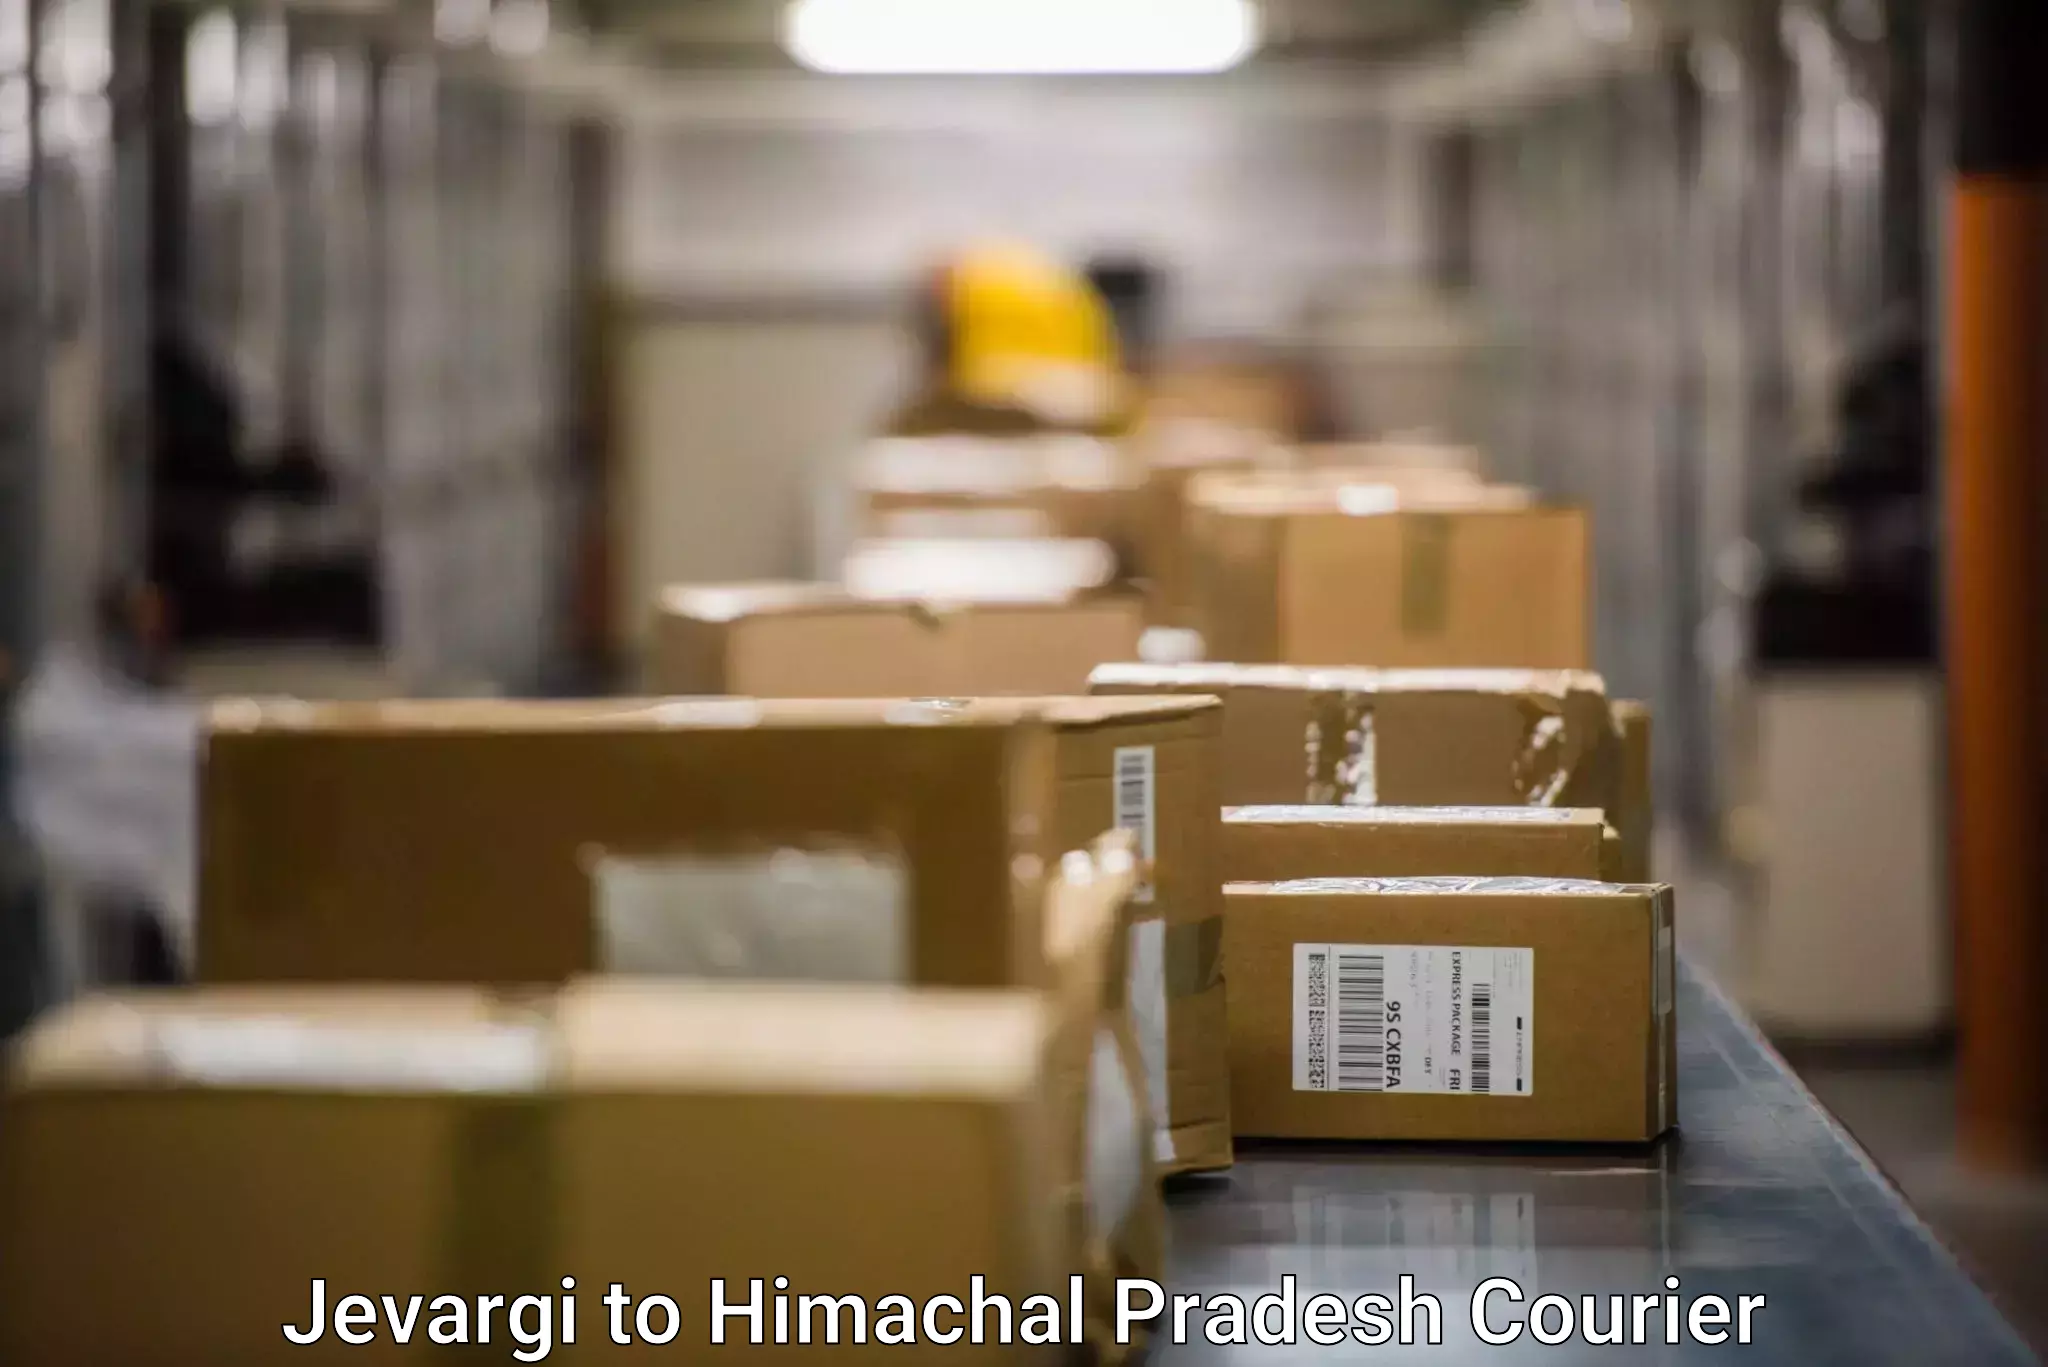 State-of-the-art courier technology Jevargi to Himachal Pradesh